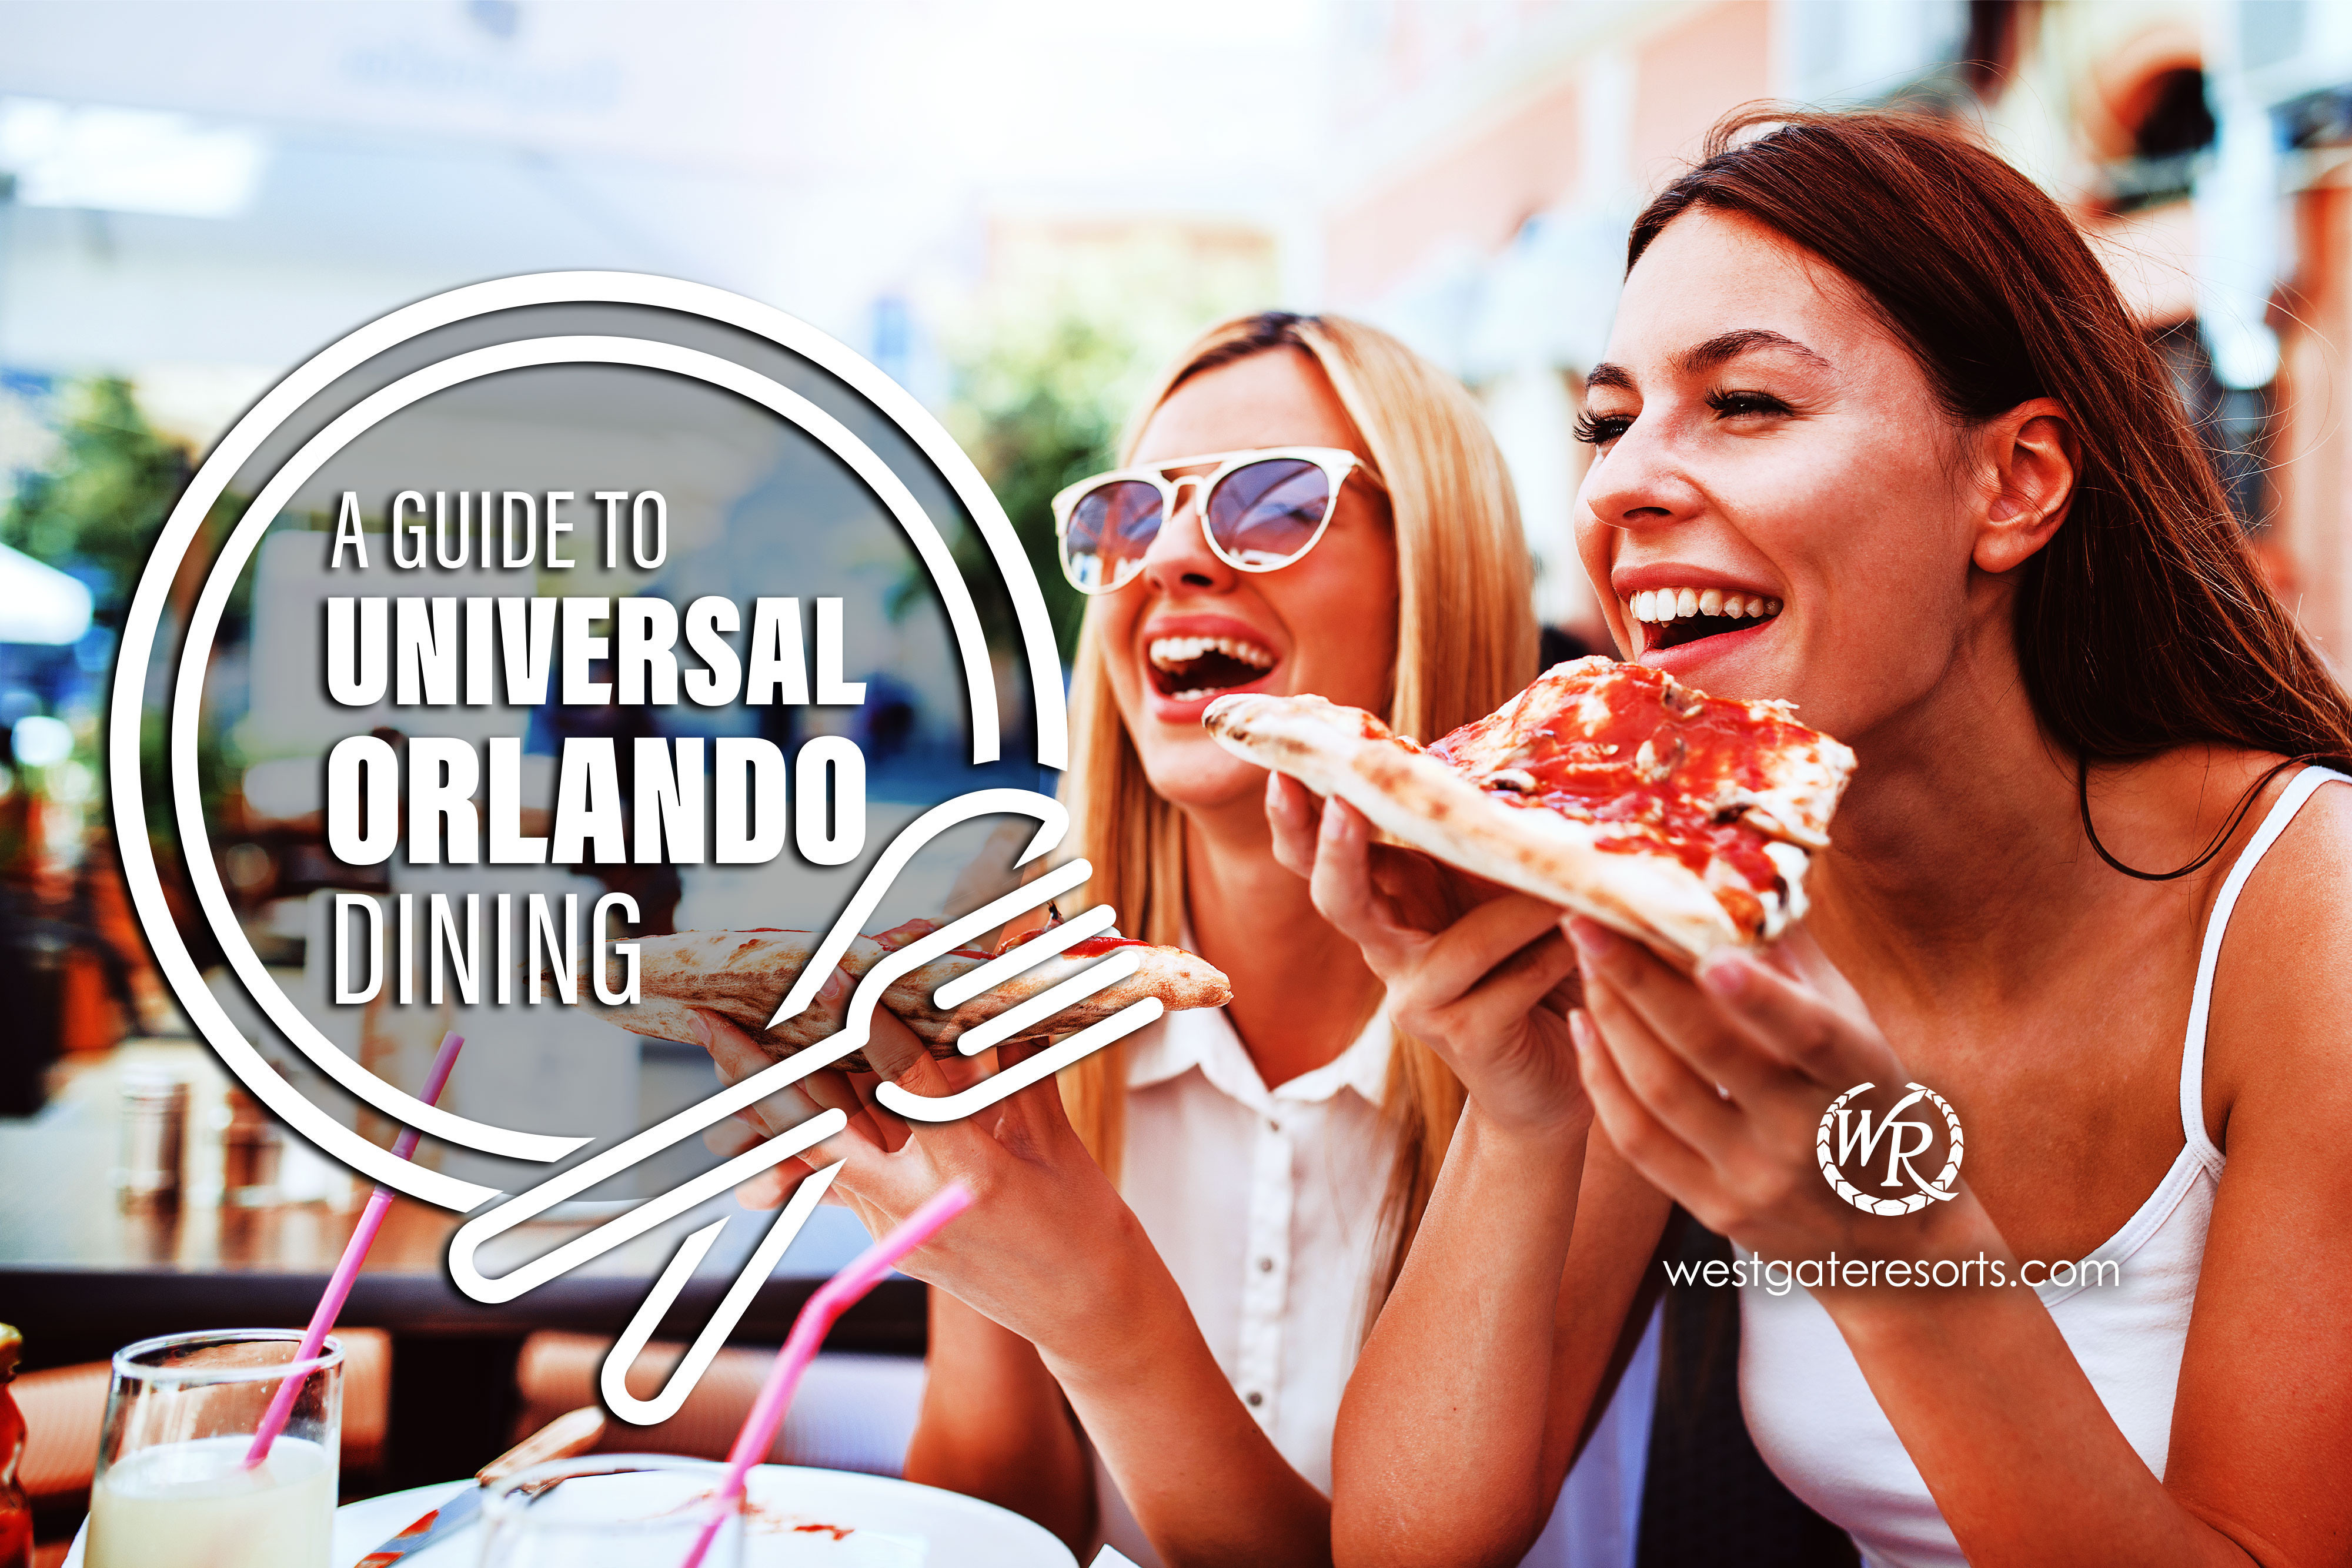 A Guide to Universal Orlando Dining